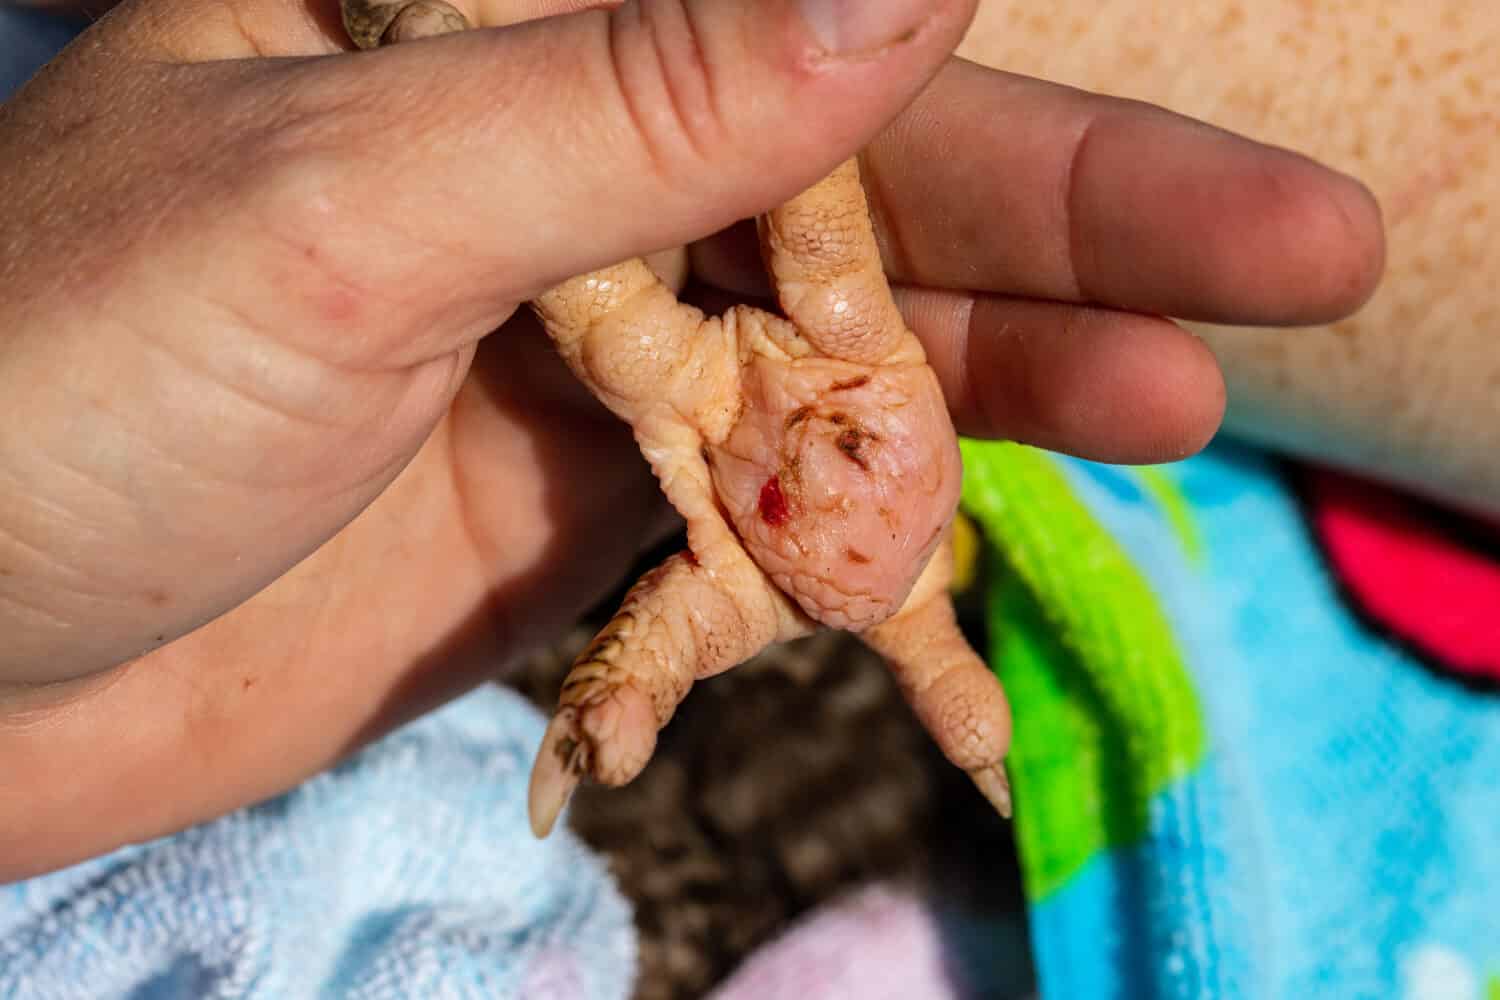 Person holding chicken's foot infected with Bumble foot